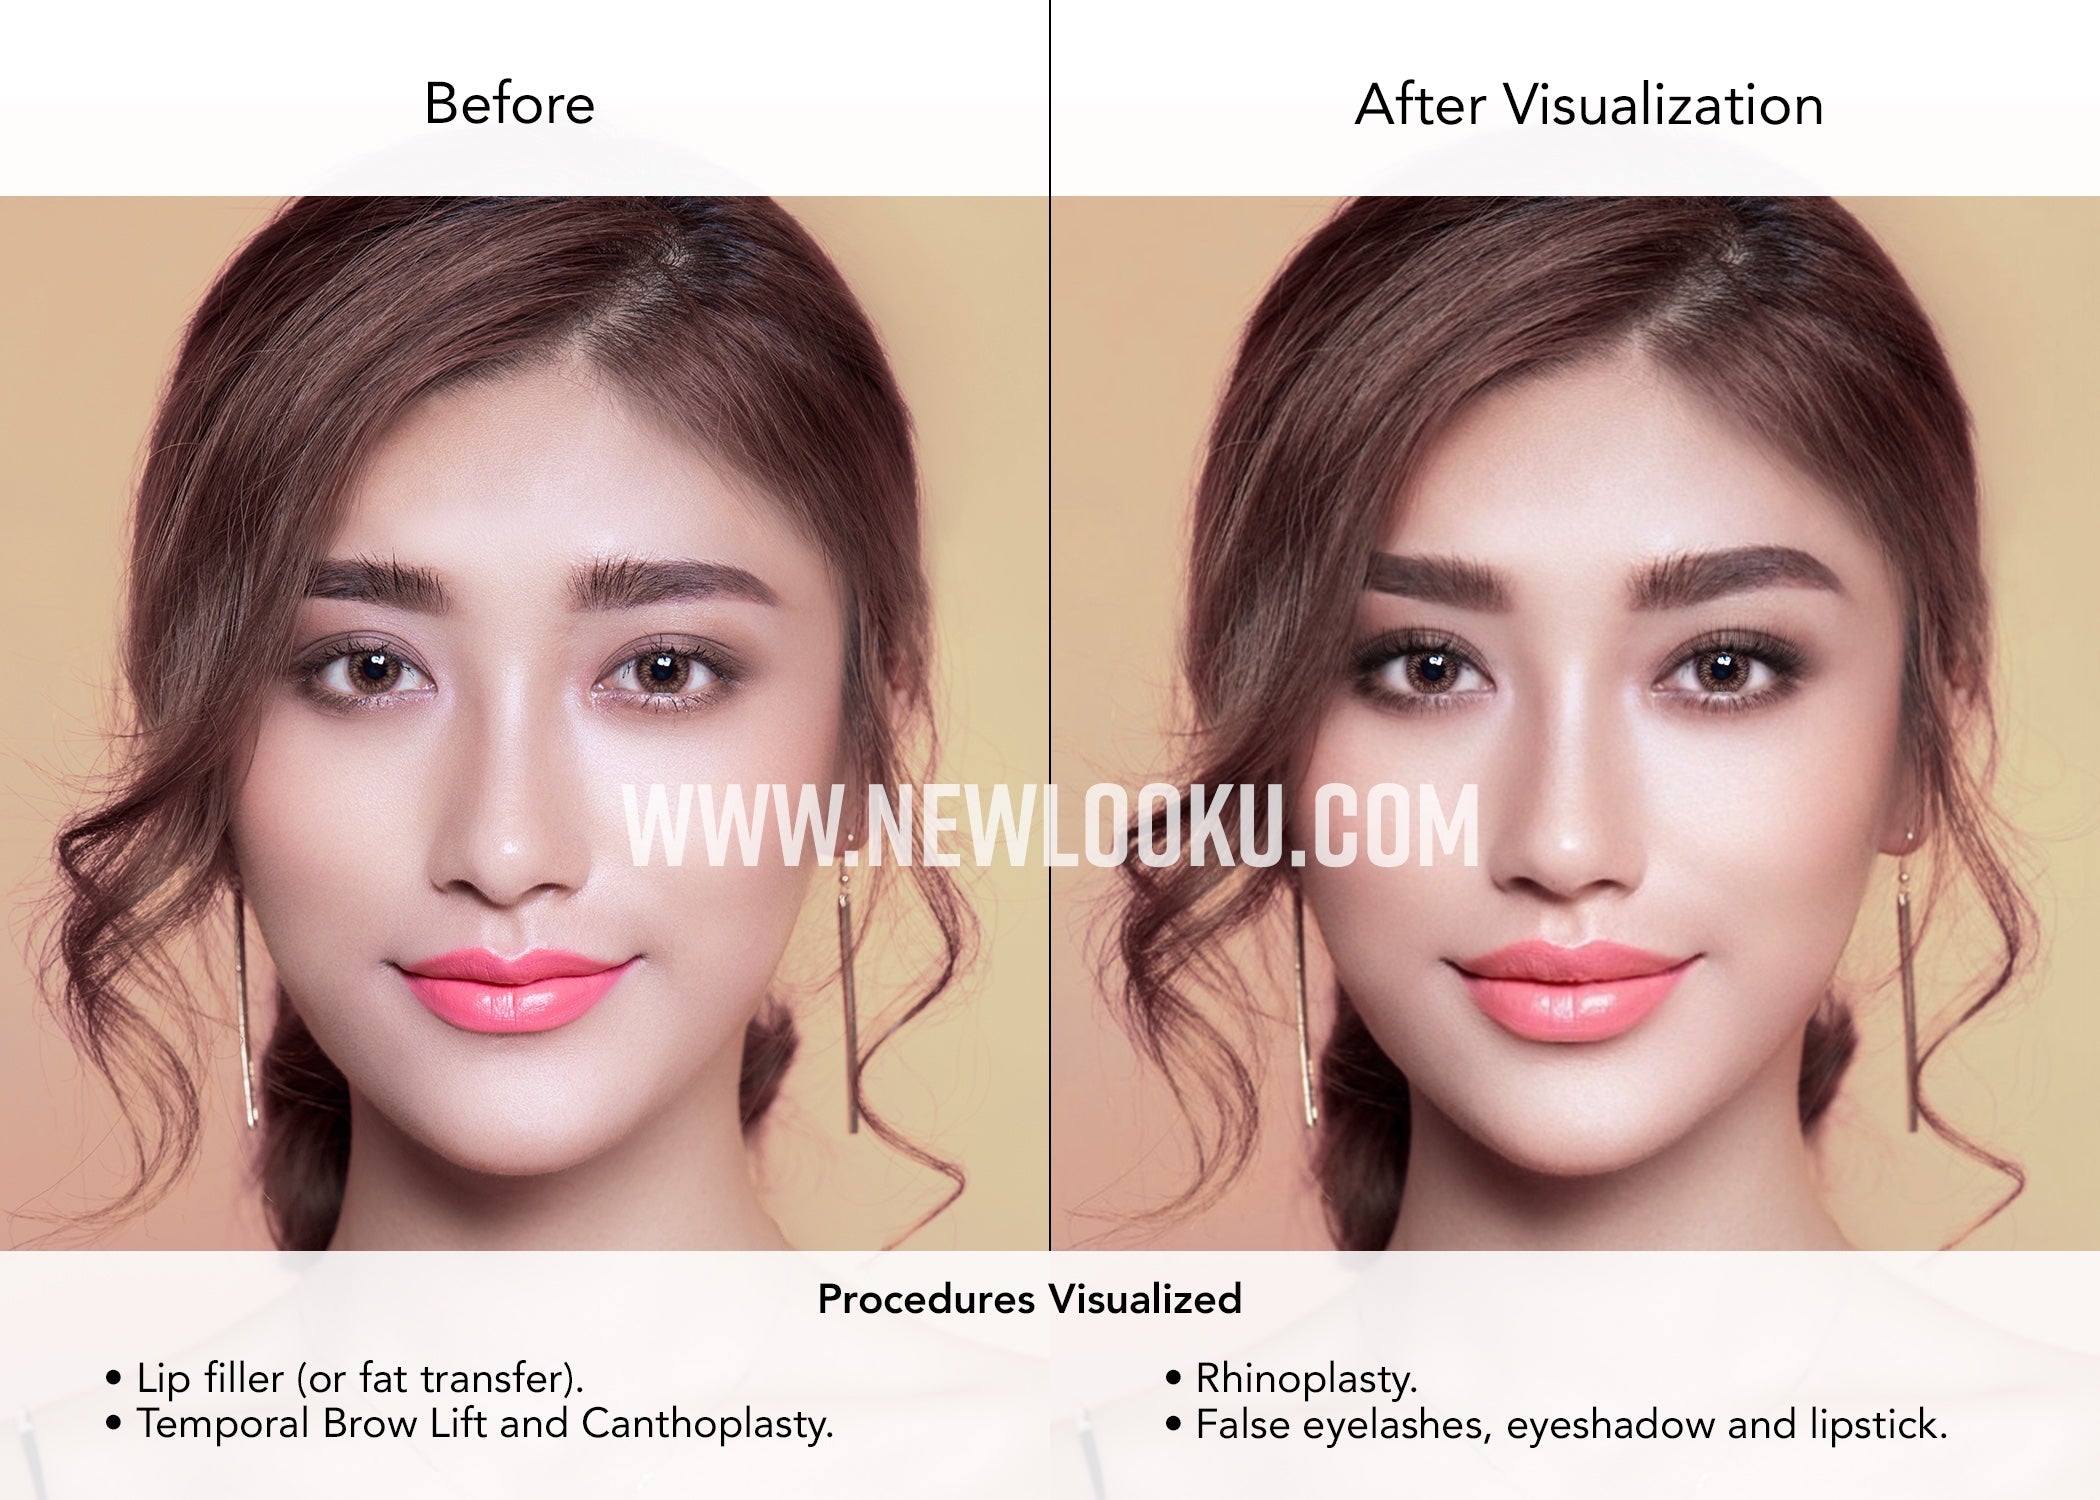 Asian Female Plastic Surgery Visualization Before and After:Lip Filler (or fat transfer). Temporal Brow Lift and Canthoplasty. Rhinoplasty. 